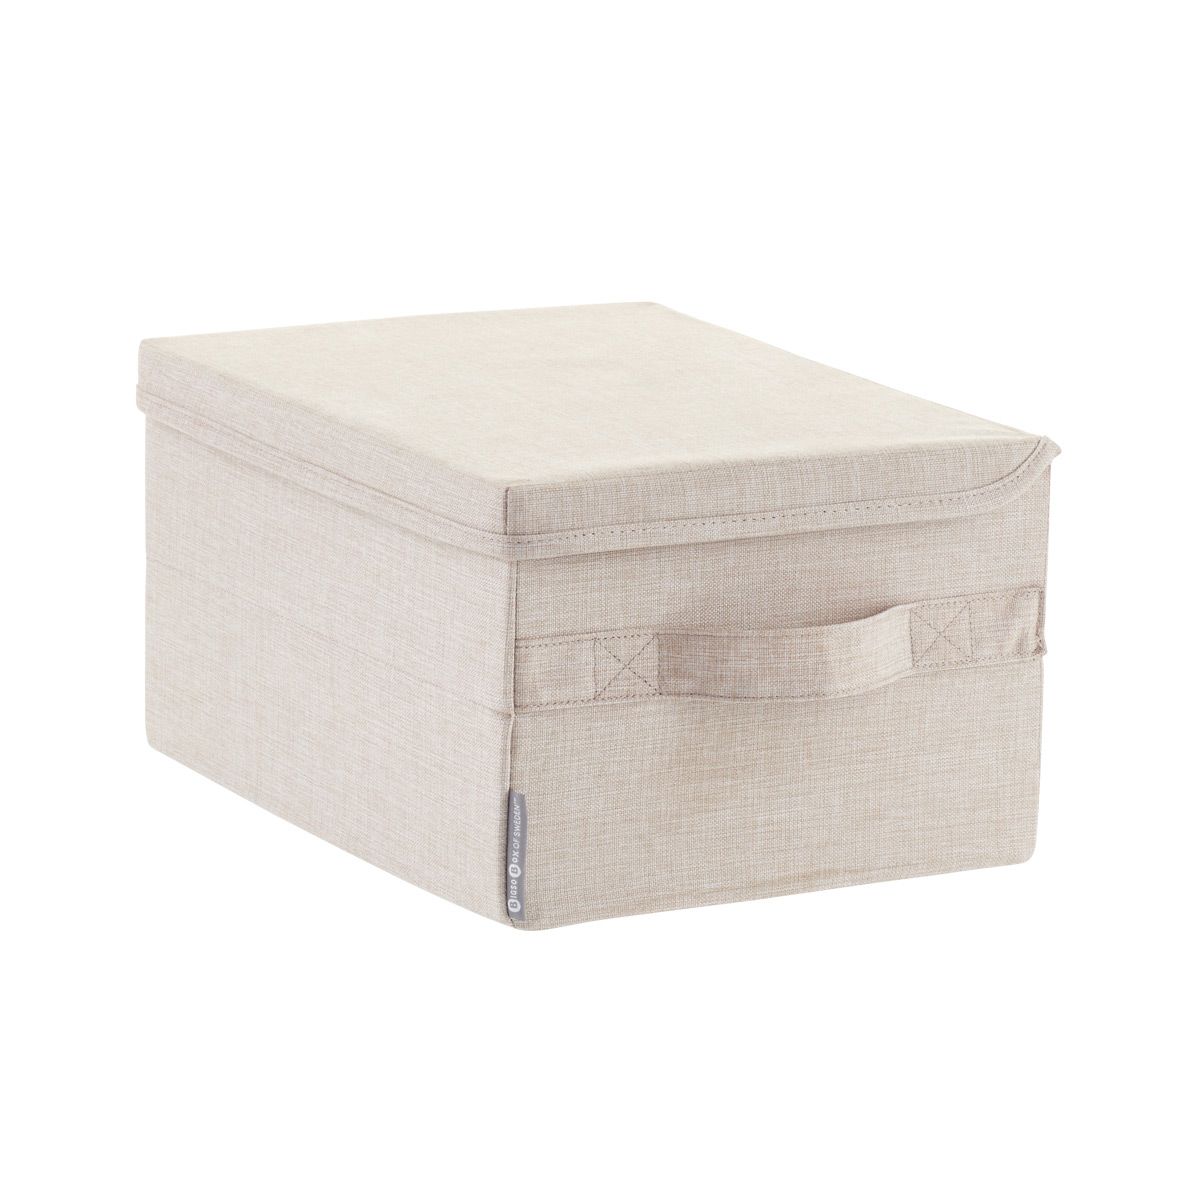 Soft Storage Box | The Container Store